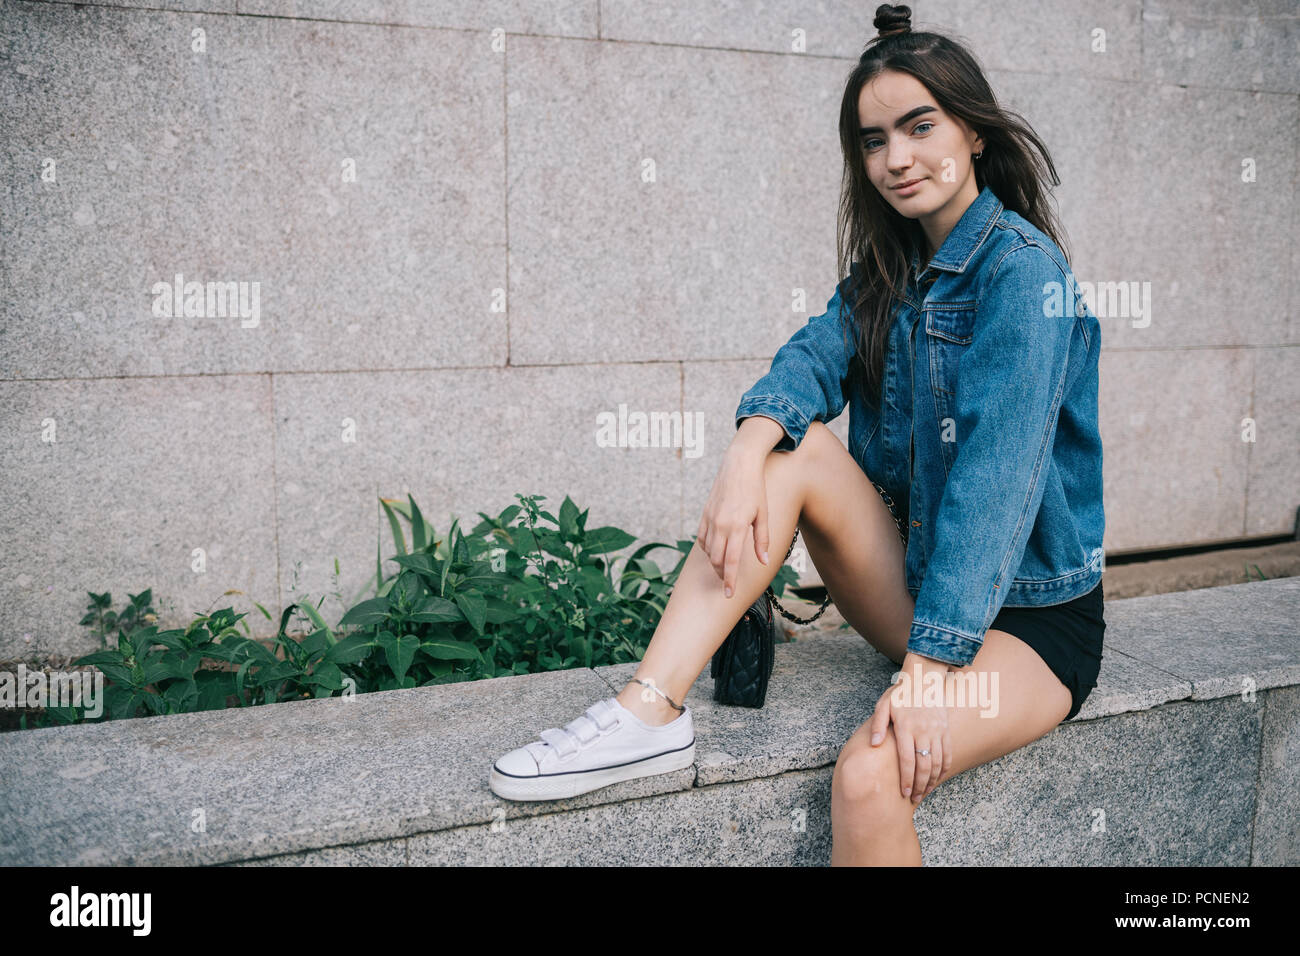 Teen Girl Wearing Casual Clothing High Resolution Stock Photography and  Images - Alamy